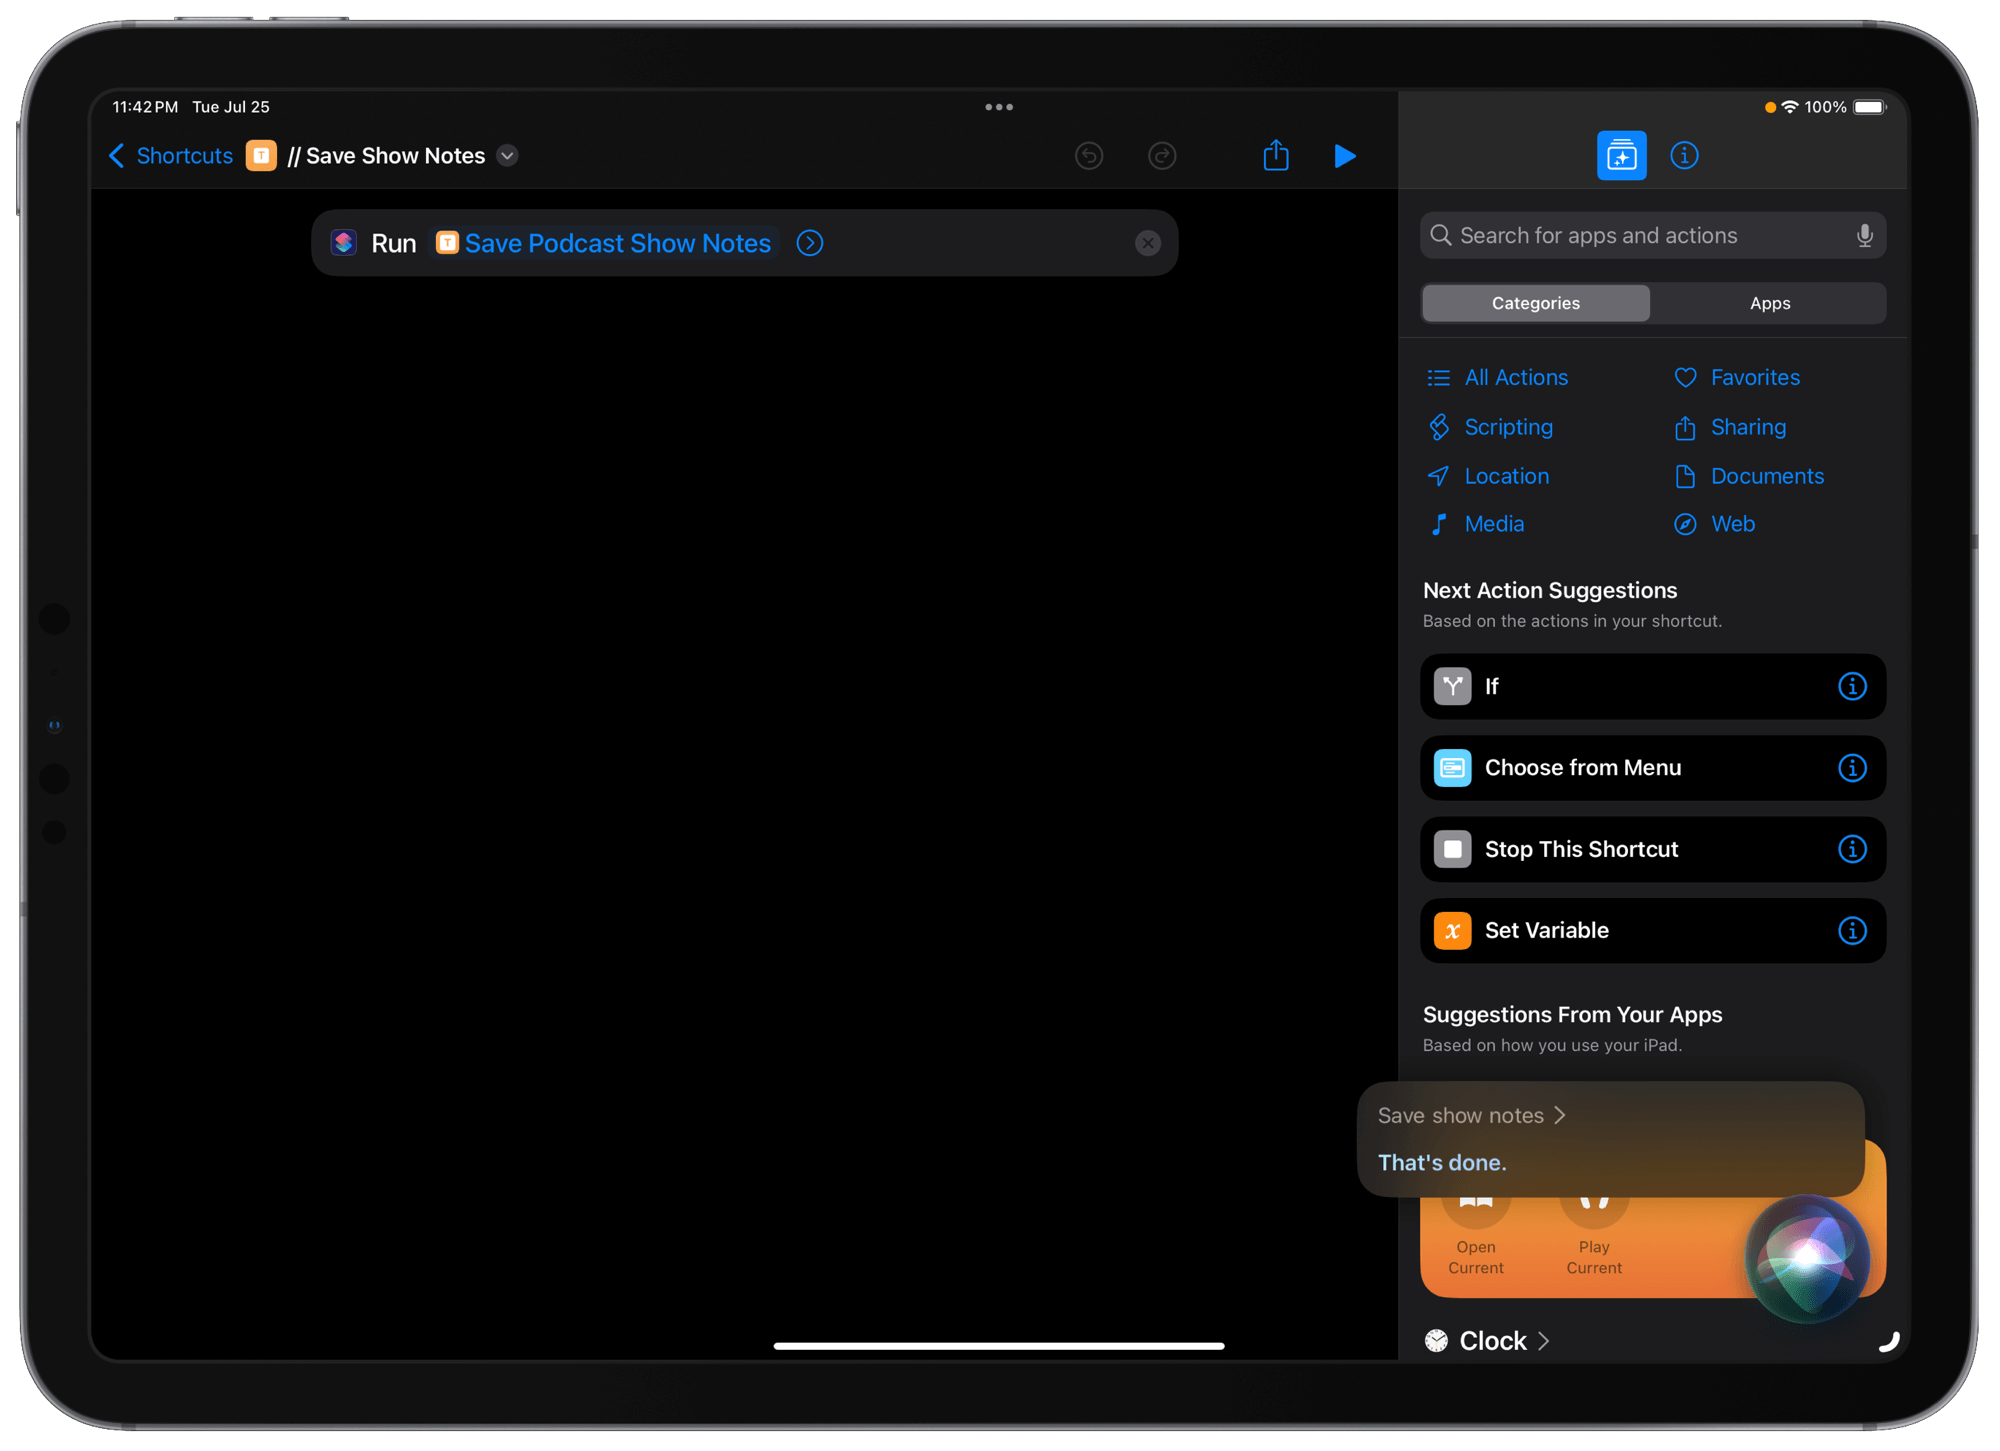 Shortcuts editor with a single ‘Run Shortcut’ action set to run the ‘Save Podcast Show Notes’ shortcut. Siri is active in the corner having been told to “Save show notes” and completing that shortcut.